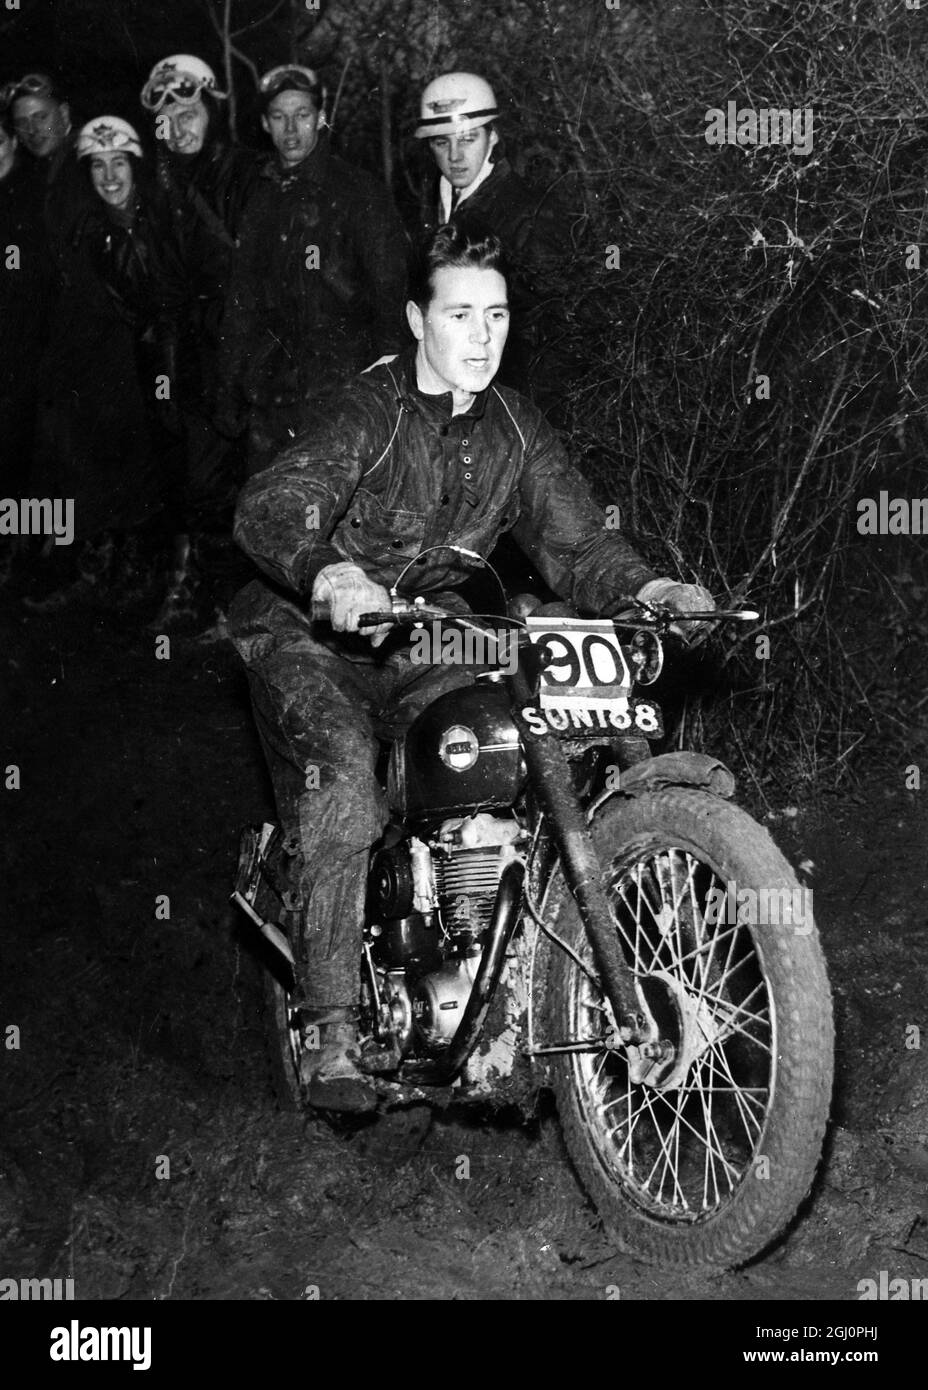 32-year-old Geoff Duke , world champion motor cyclist , in action at the Chester Motor Club 's Picton trial when he rode with 104 amateurs . 29 November 1955 Stock Photo